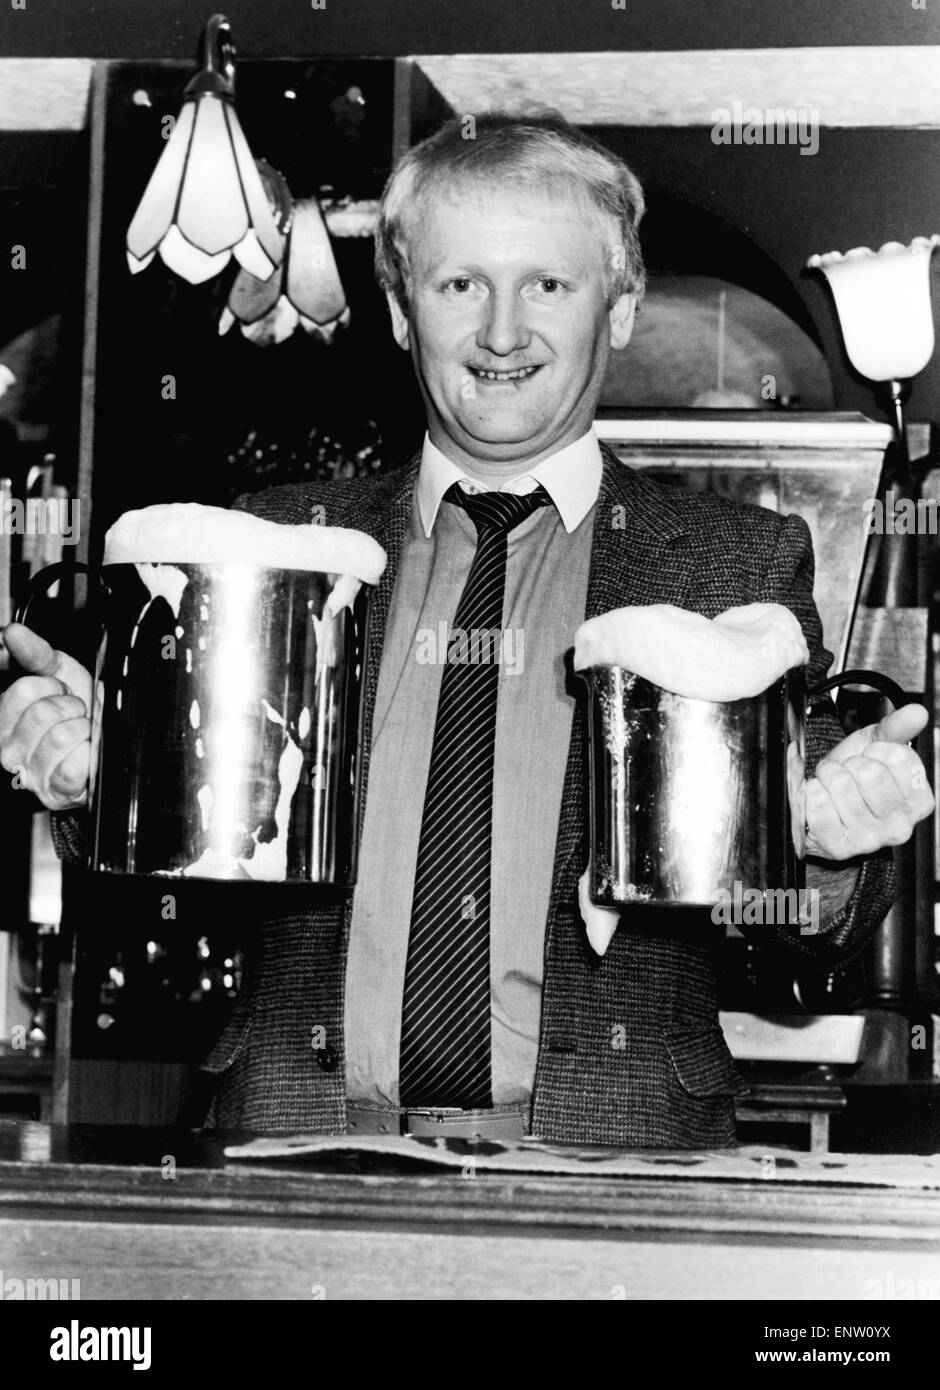 Calling all big drinkers! Landlord Ron Lambton serves his beer in quarts to one gallon pots. He hit on the idea to cut queueing at the bar and reduce the washing up. Bulk buying gives his customers a cheaper night too - 'I hardly sell pints at all now,' he said. 26th February 1985 Stock Photo